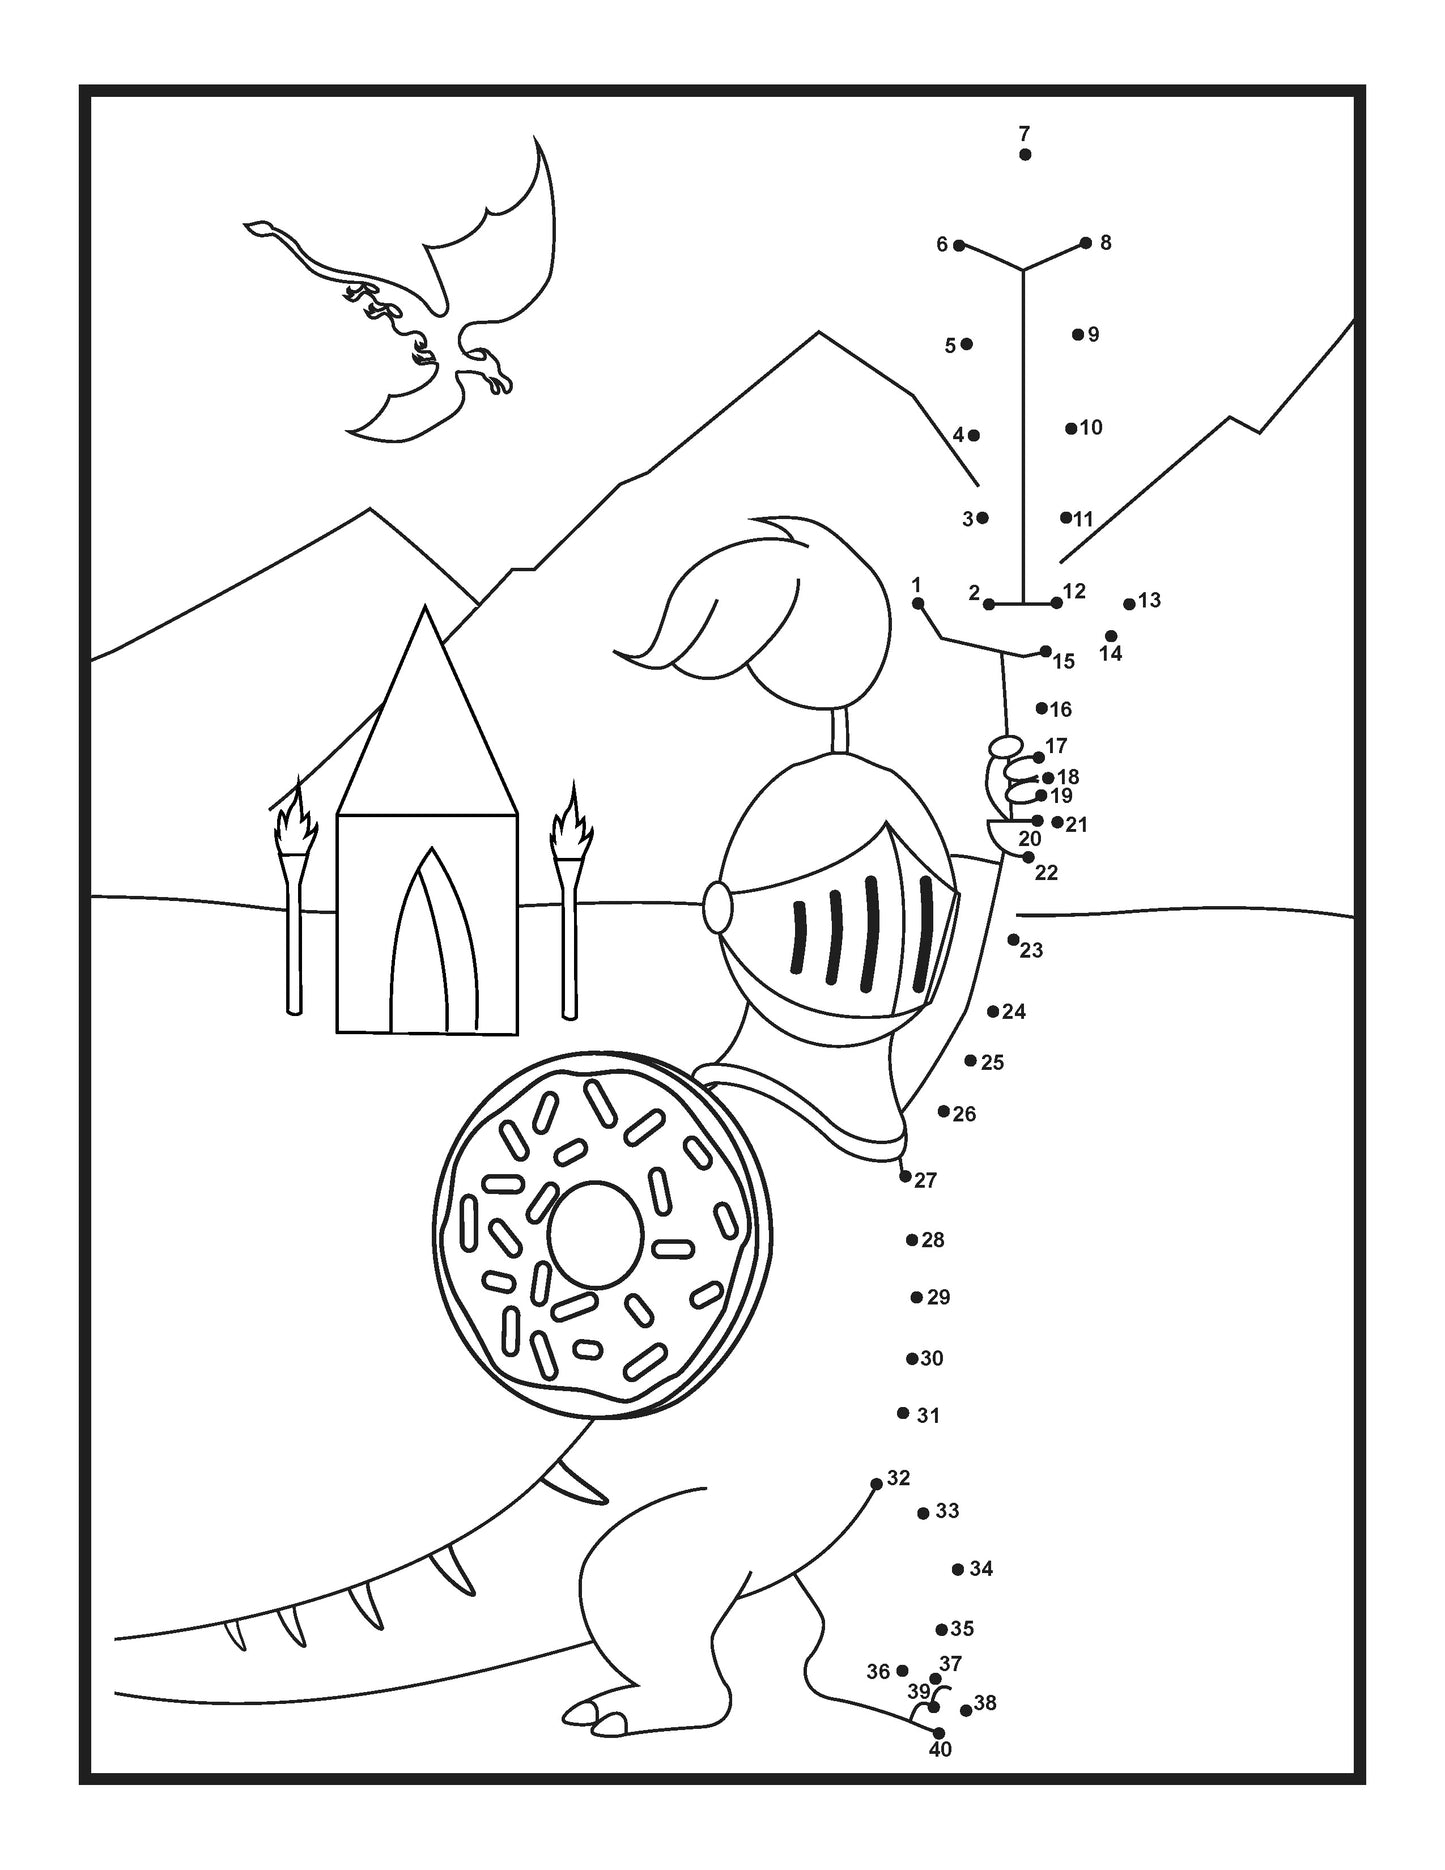 This is a children's connect-the-dots activity page featuring a fantastical scene. A friendly-looking dinosaur dressed as a knight, complete with a helmet and shield, stands before a simple castle. The knight holds a sword, poised heroically. The dots, numbered 1 to 40, outline the knight and castle, encouraging number sequencing and motor skills. In the sky, an illustrated dragon flies above mountainous terrain, adding to the medieval fantasy theme of the activity, which also provides space for coloring.